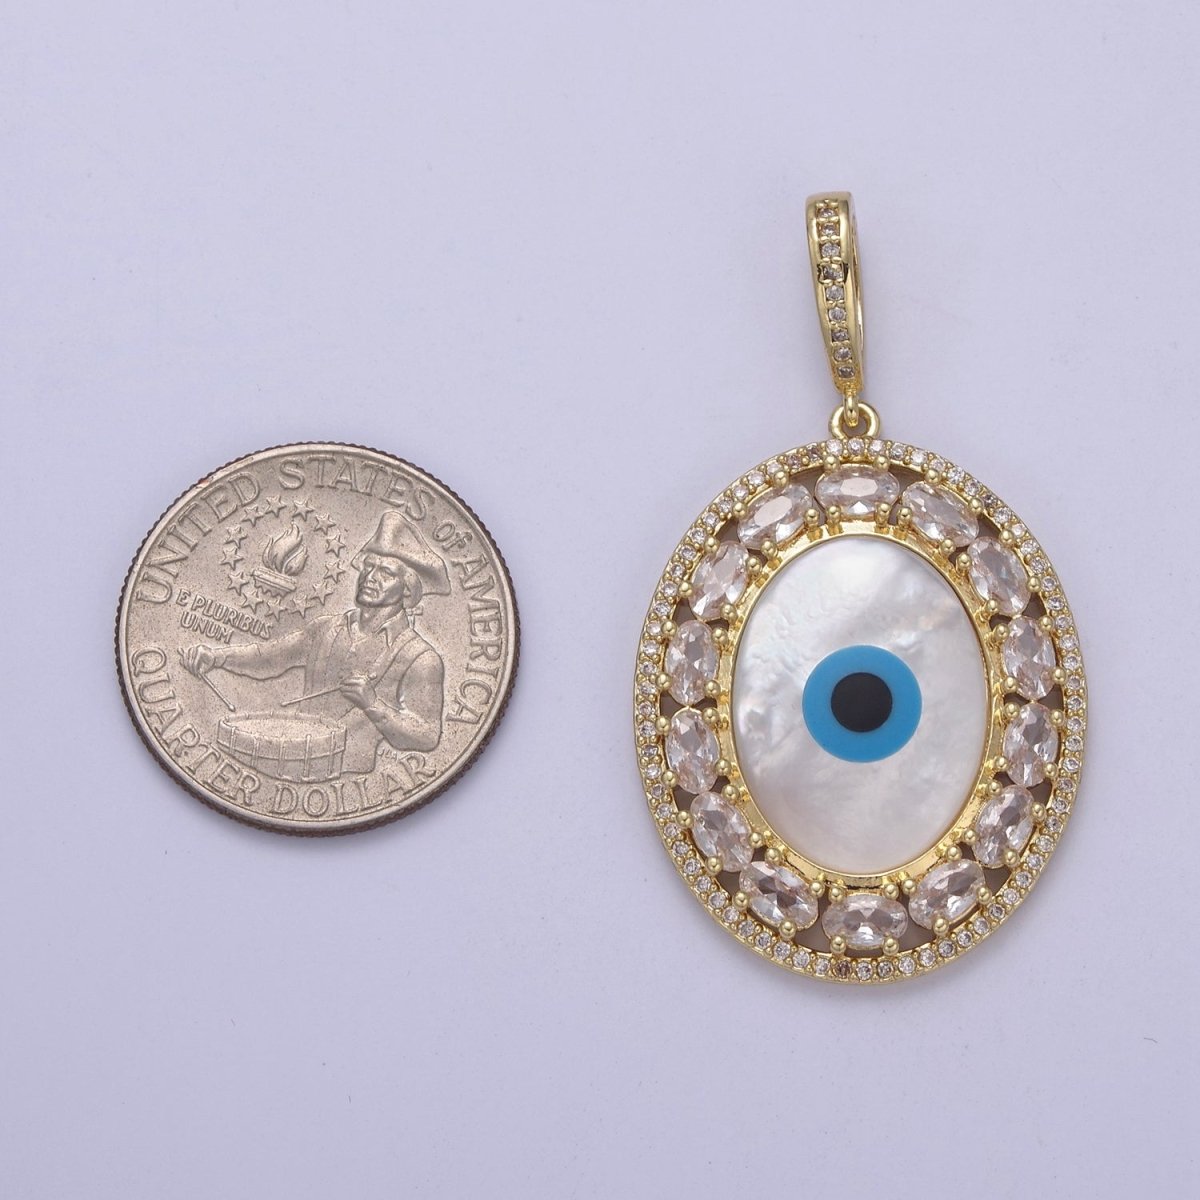 Statement Bold Oval Evil Eye Charm Gold Filled Eye Charms, Evil Eye Medallion Pendant Necklace Good Lucky Amulet Protection Bohemian Jewelry Supply H-571 - DLUXCA